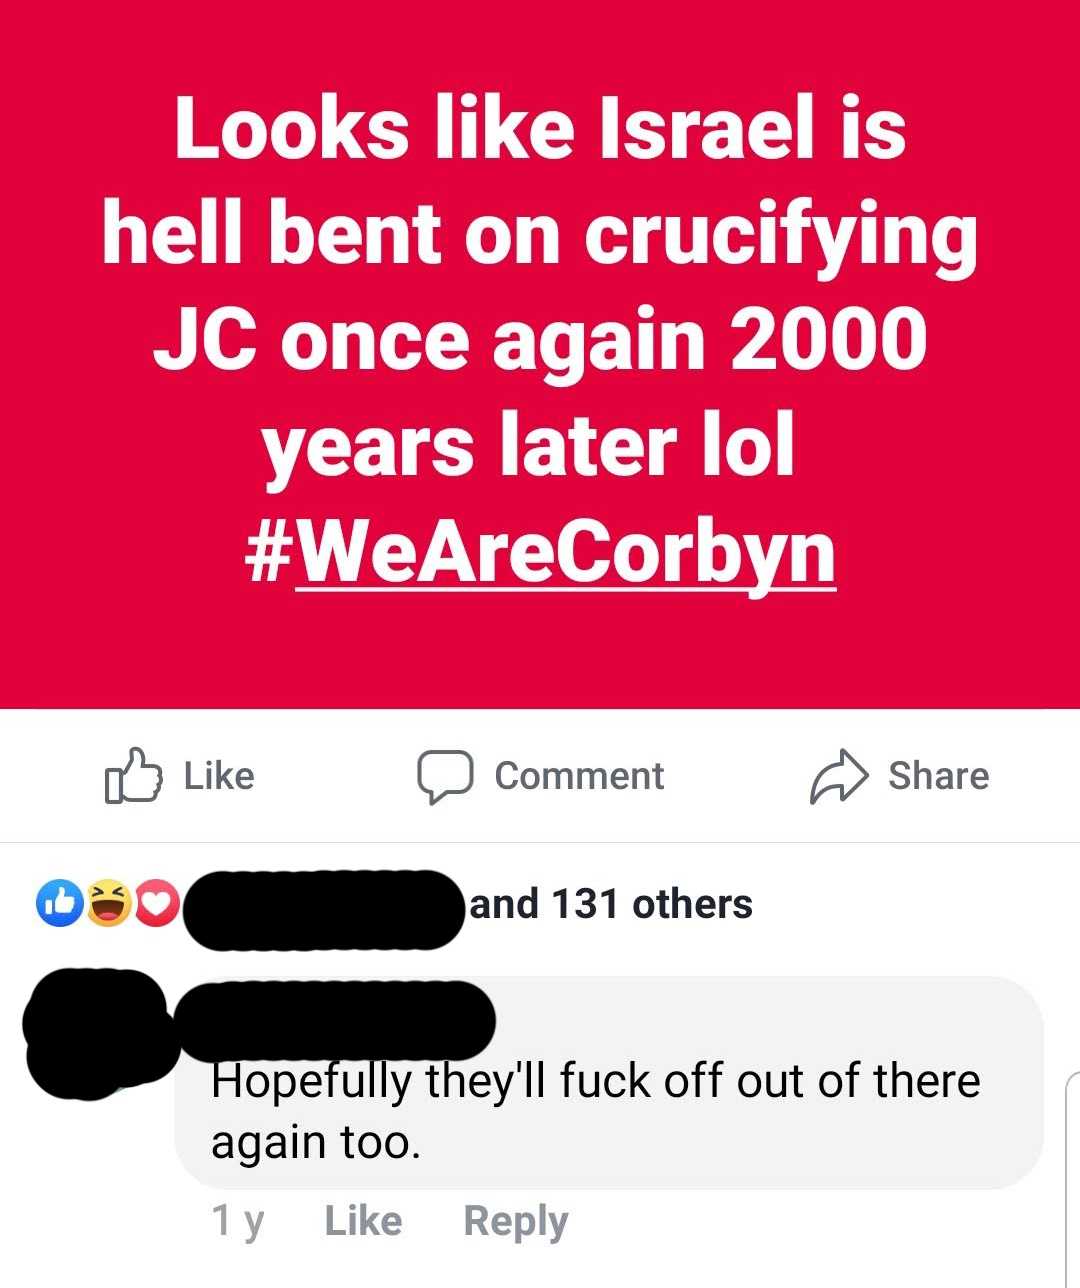 Christ killers to deny Labour antisemitism